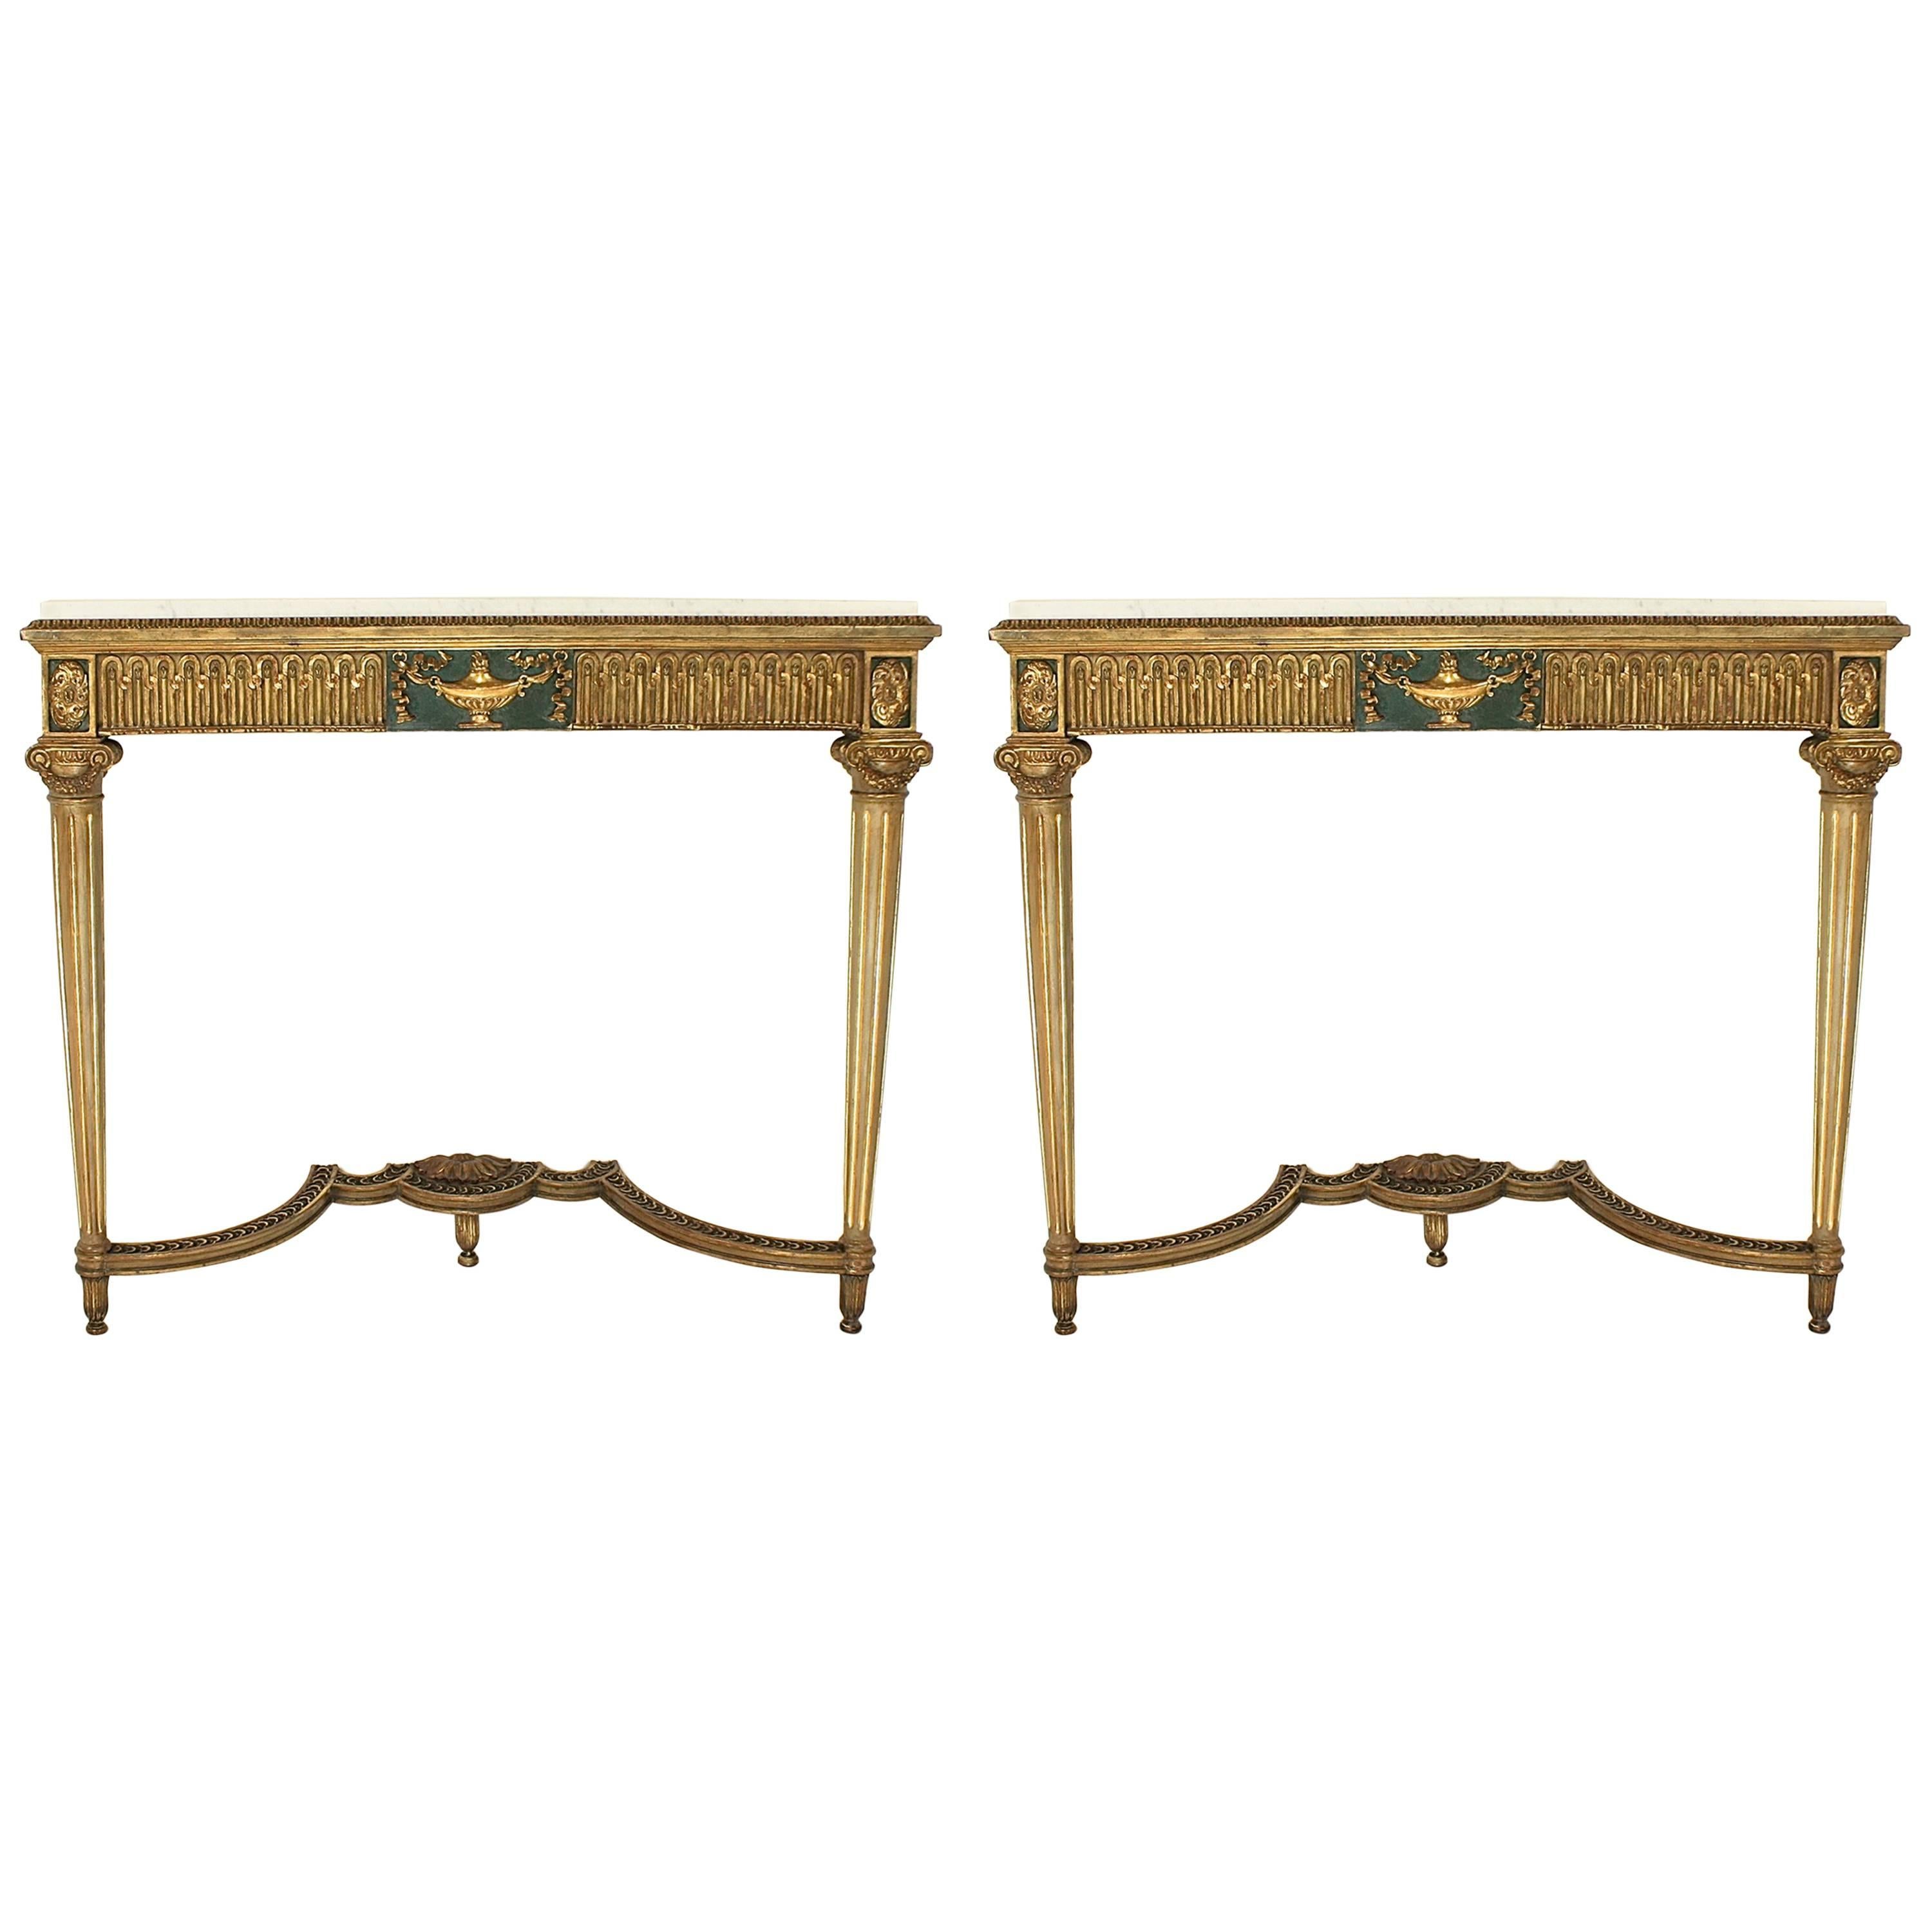 Pair of Narrow Louis XVI Style Giltwood Console Tables